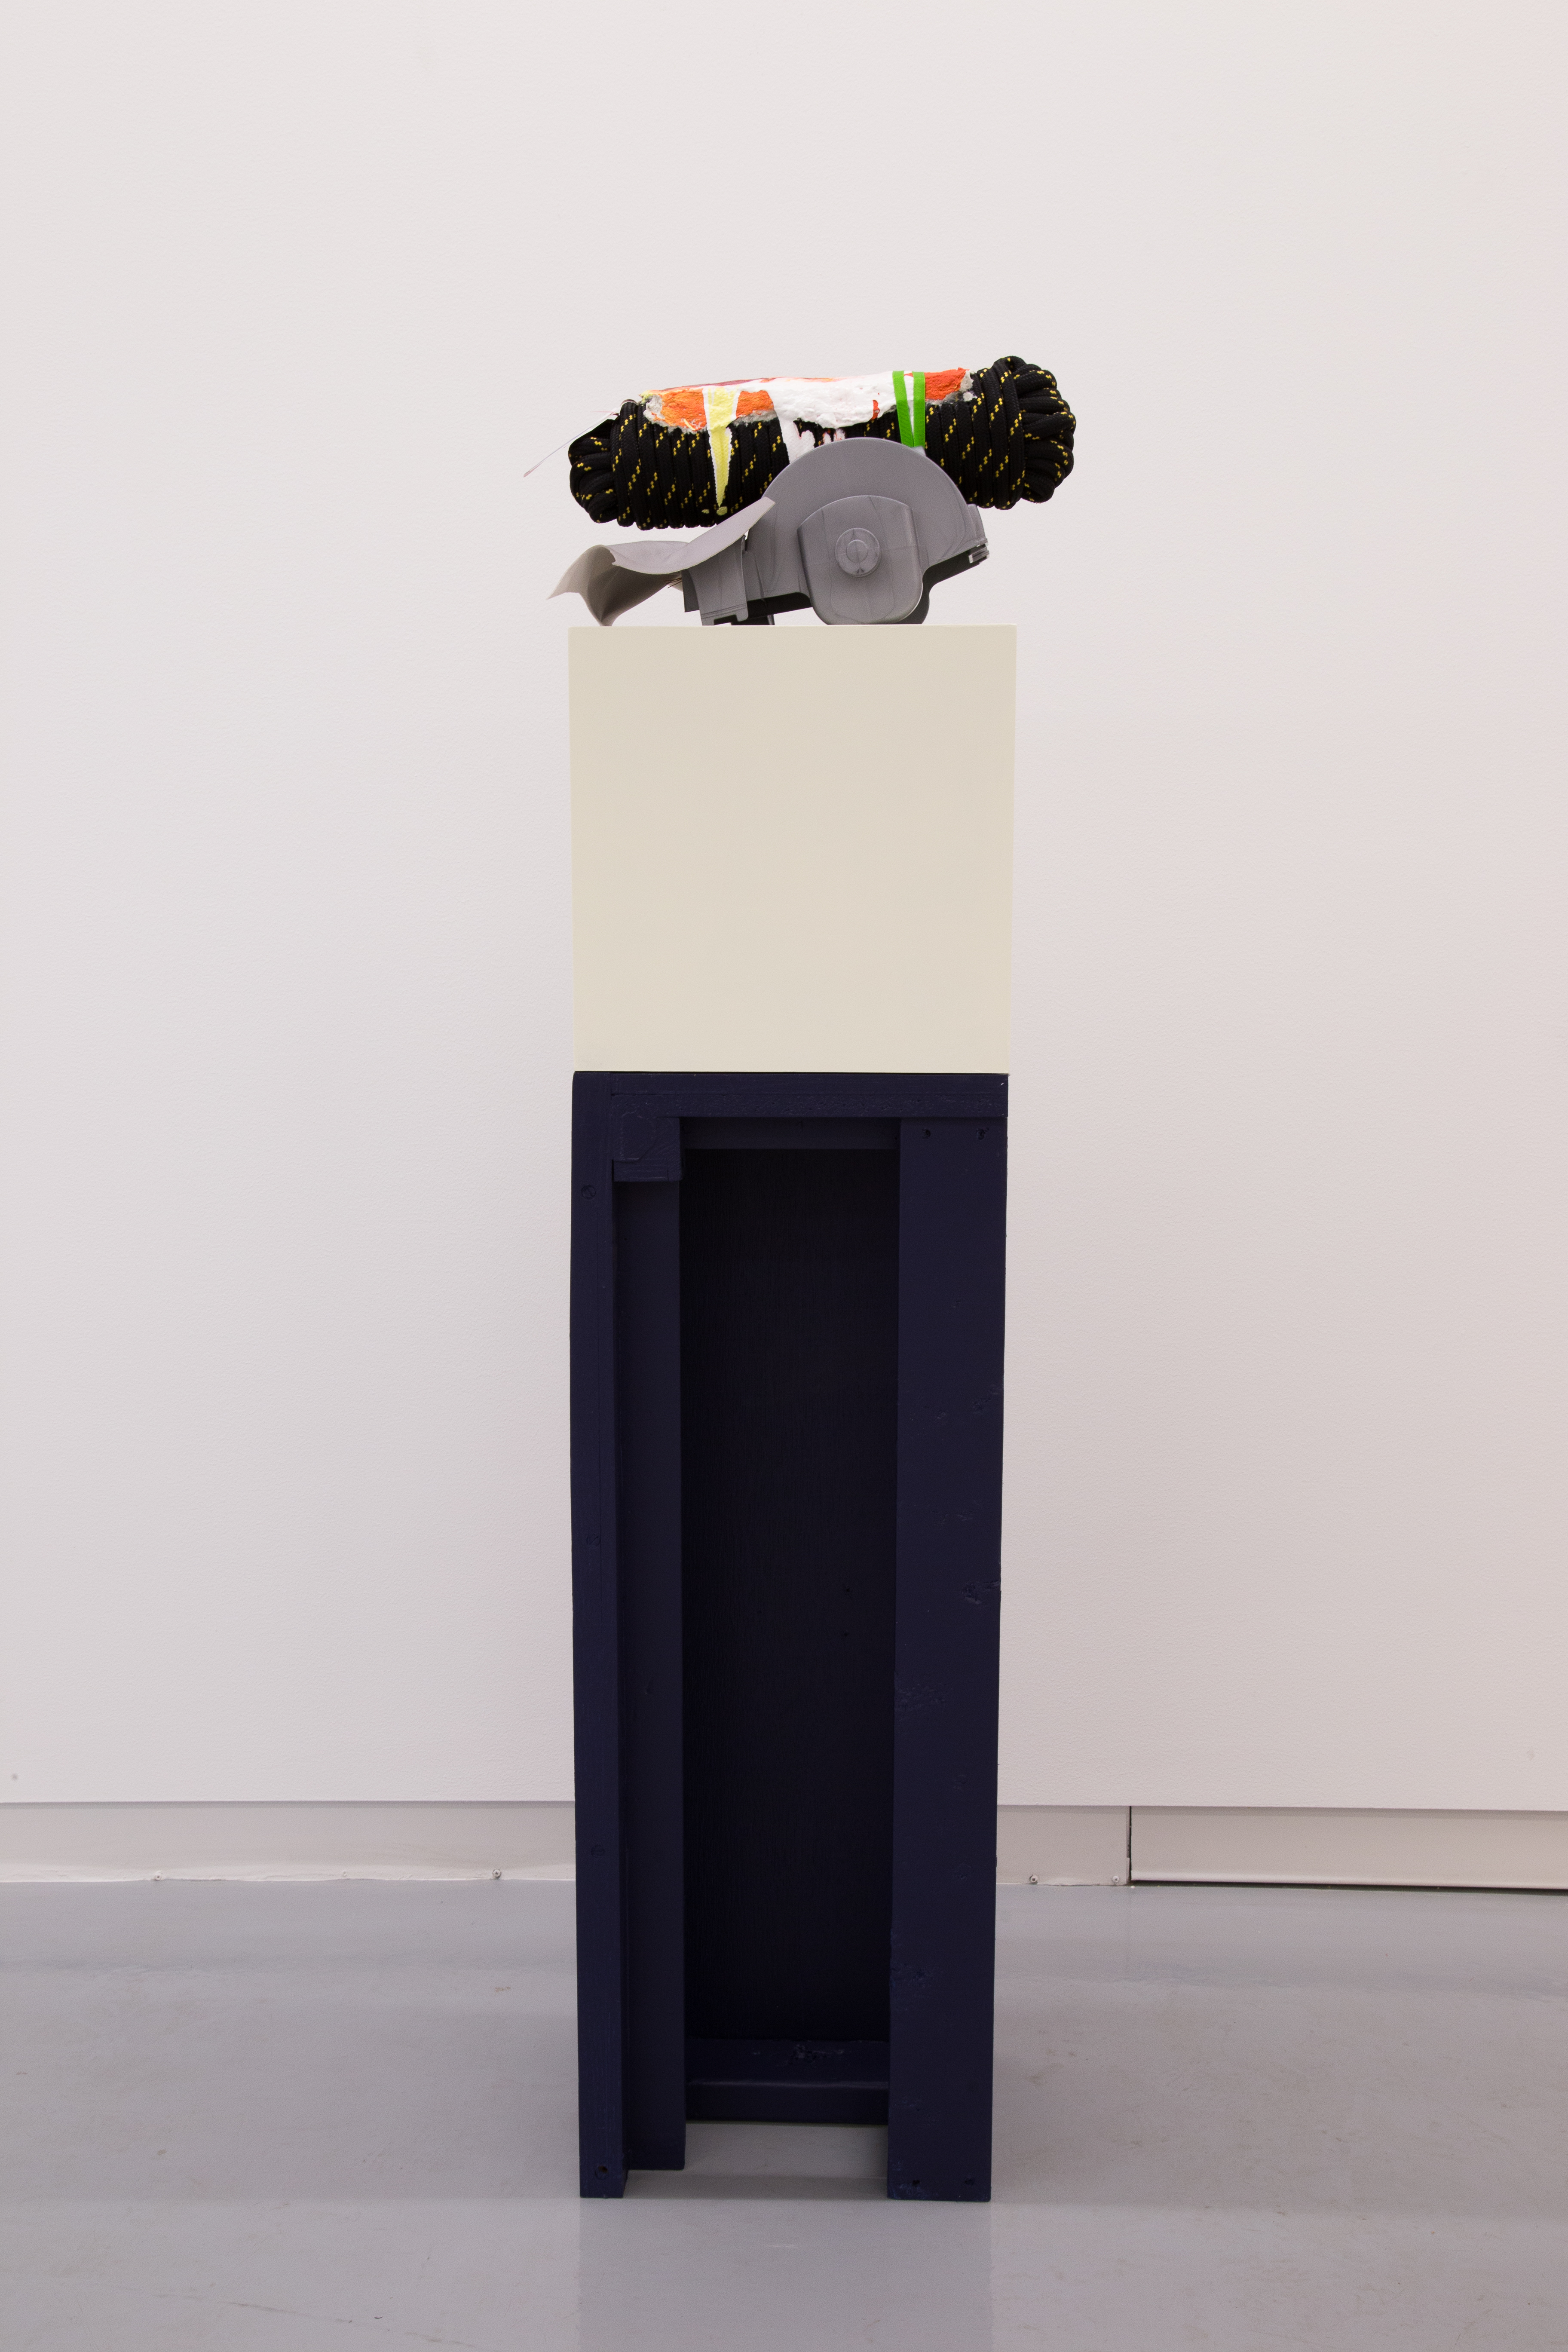 Jessica Stockholder, Catapult Anime Stack, 2015, in the Gupta Moss collection, Chicago.